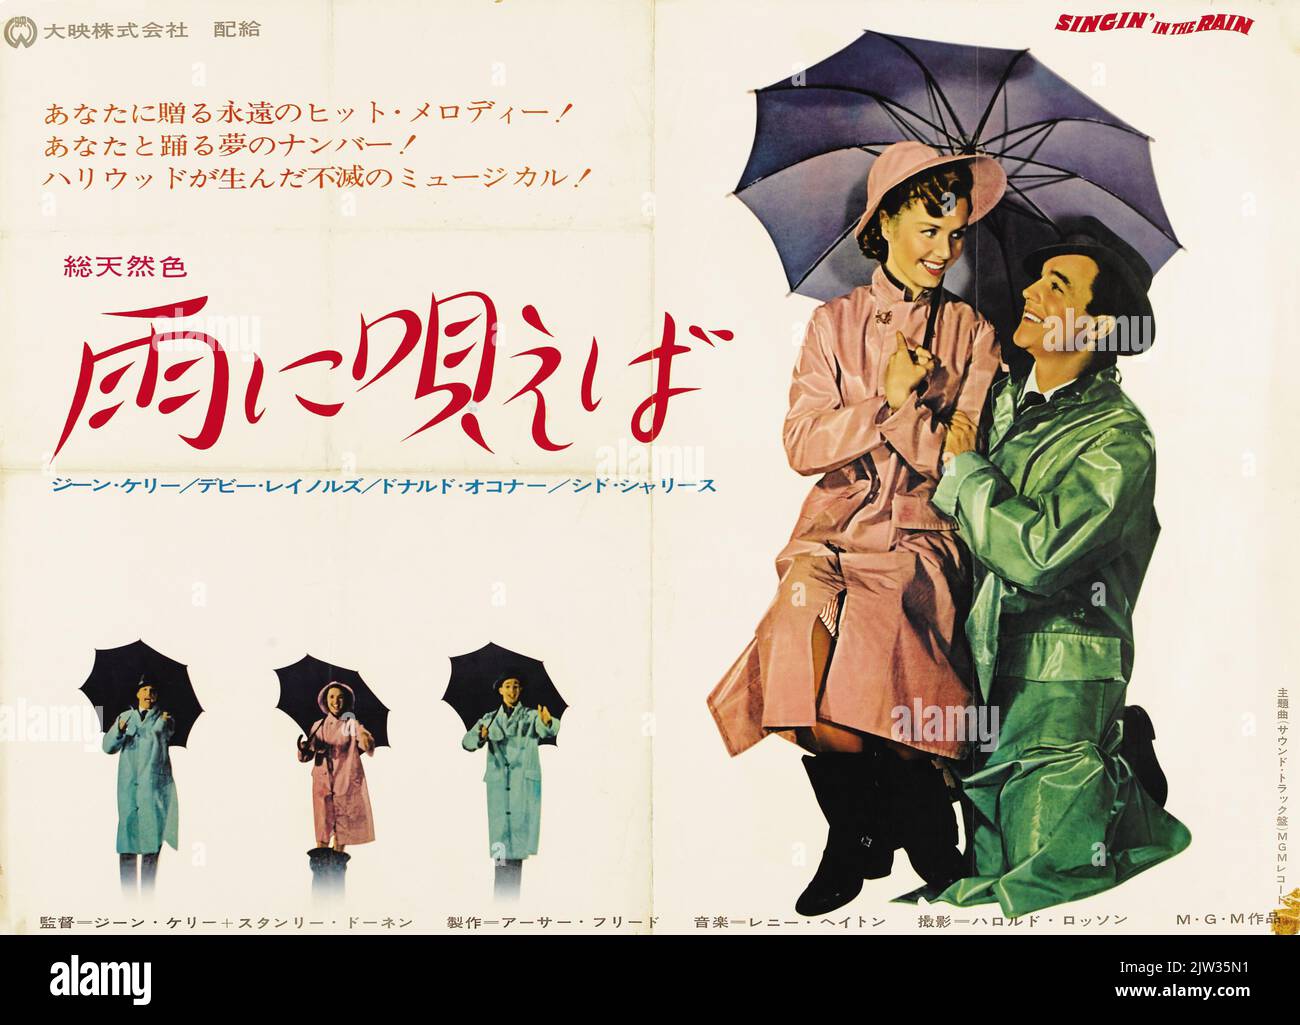 Singing in the rain, japanese version『雨に唄えば』（あめにうたえば、原題：Singin' in the Rain）は、アメリカのポピュラーソング及びそれを主題歌にした1952年公開のミュージカル映画 - Singin' in the Rain is an American popular song and a musical film released in 1952 with its theme song. Gene Kelly, Debbie Reynolds. Stock Photo